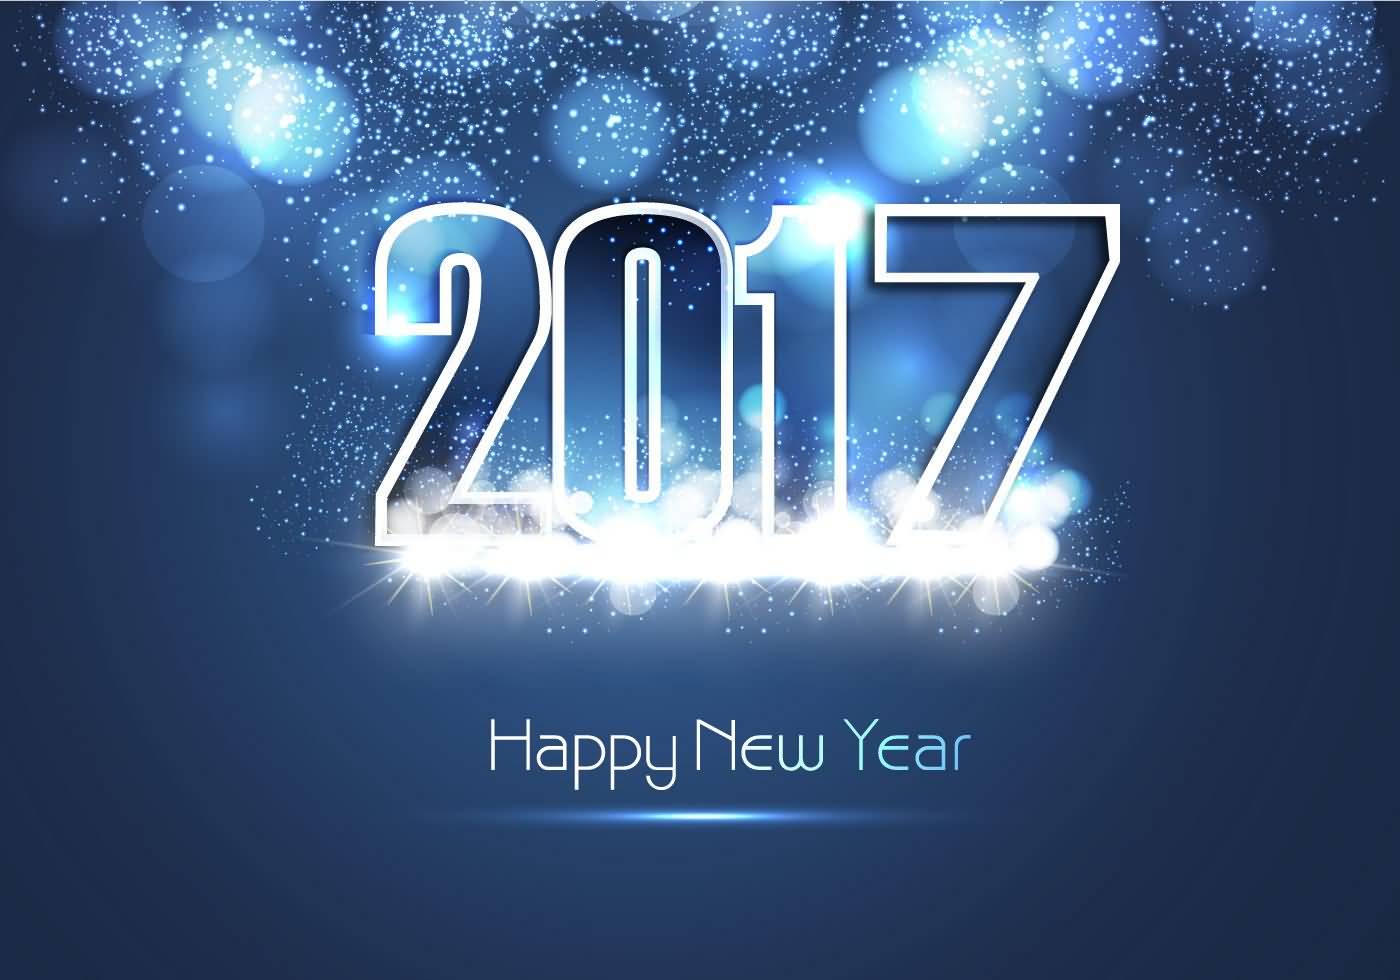 Happy New Year 2017 Wishes Wallpaper